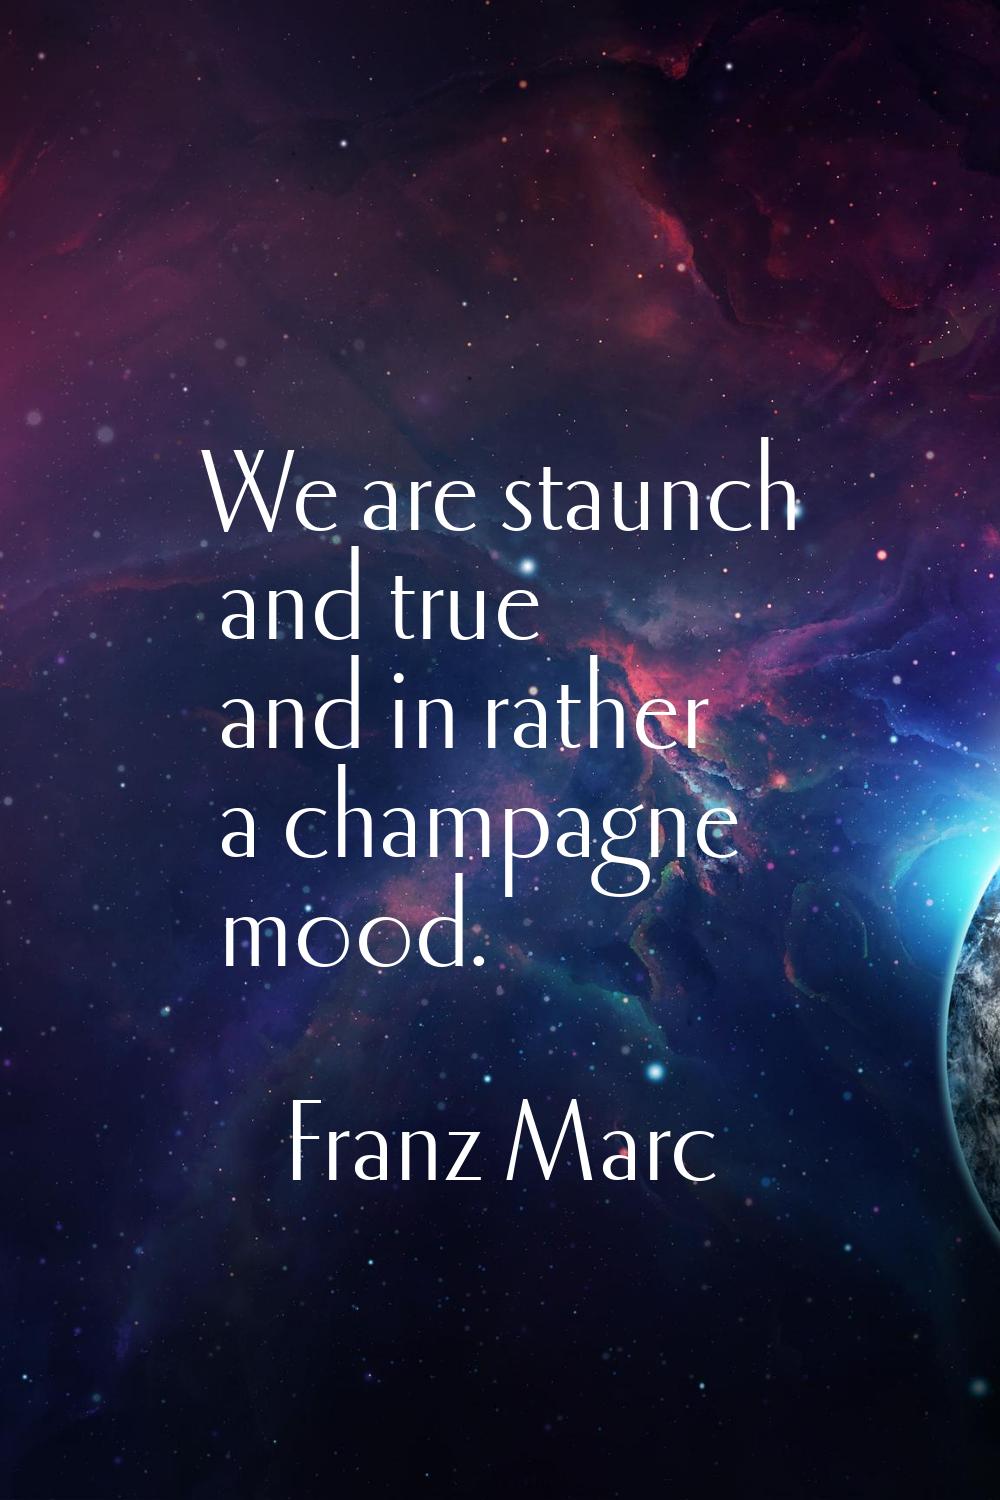 We are staunch and true and in rather a champagne mood.